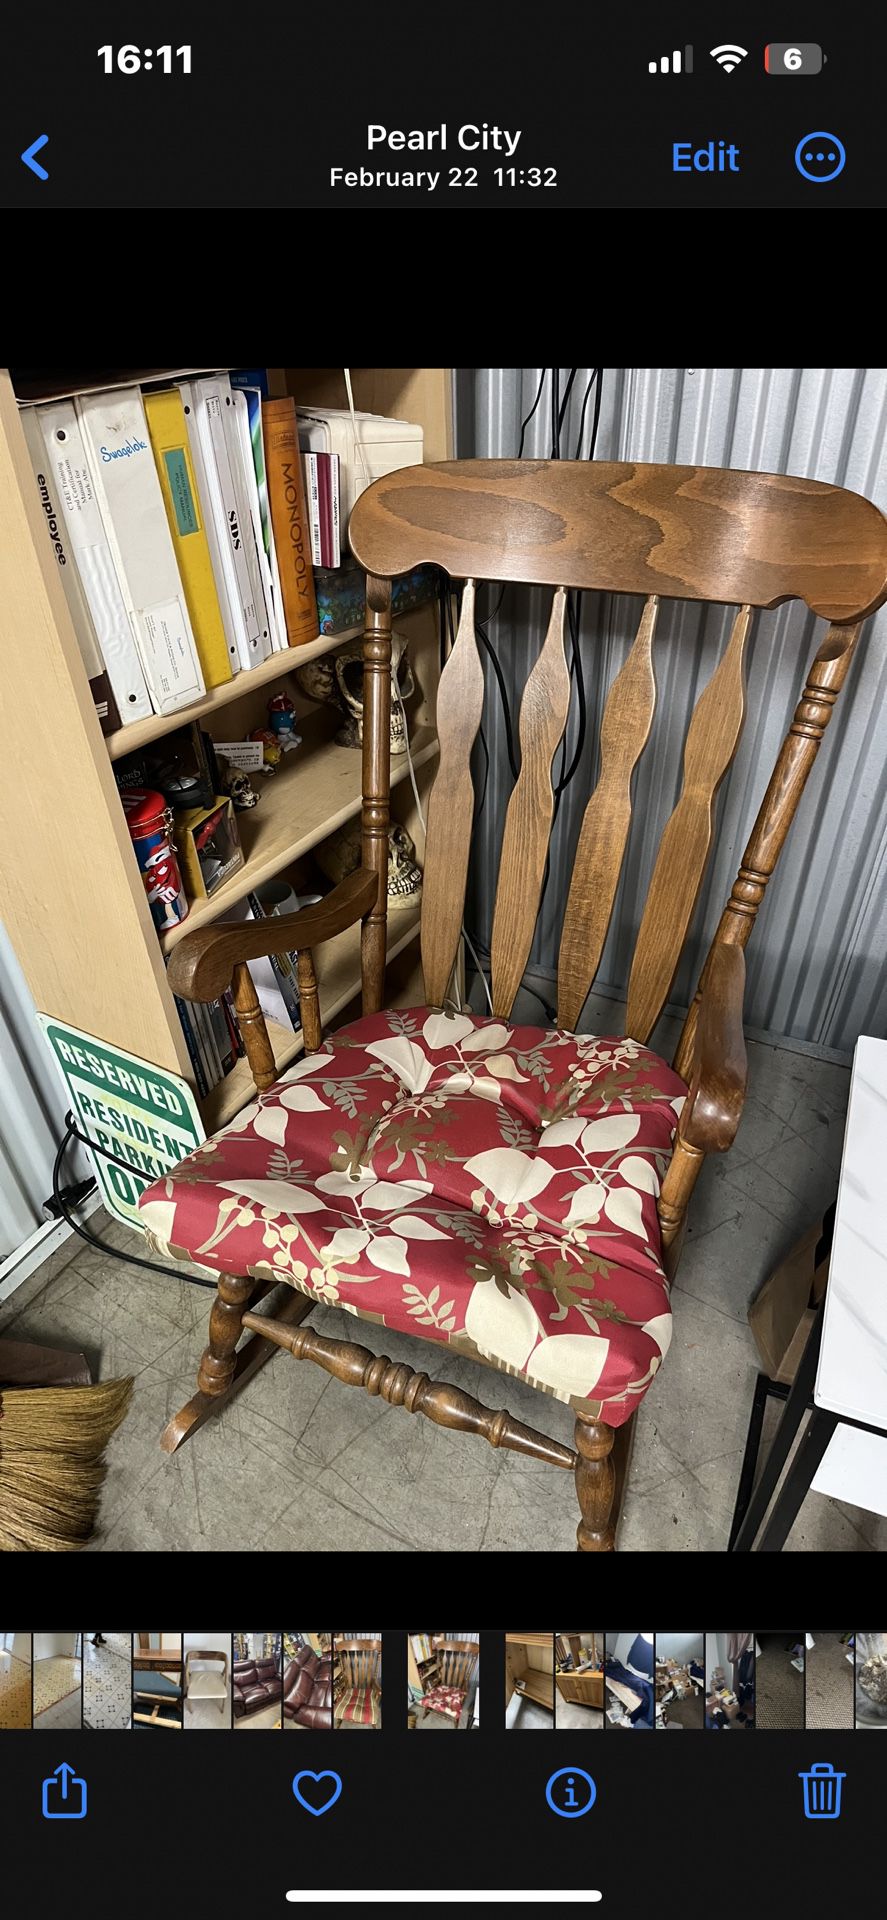 Solid wooden rocking chair